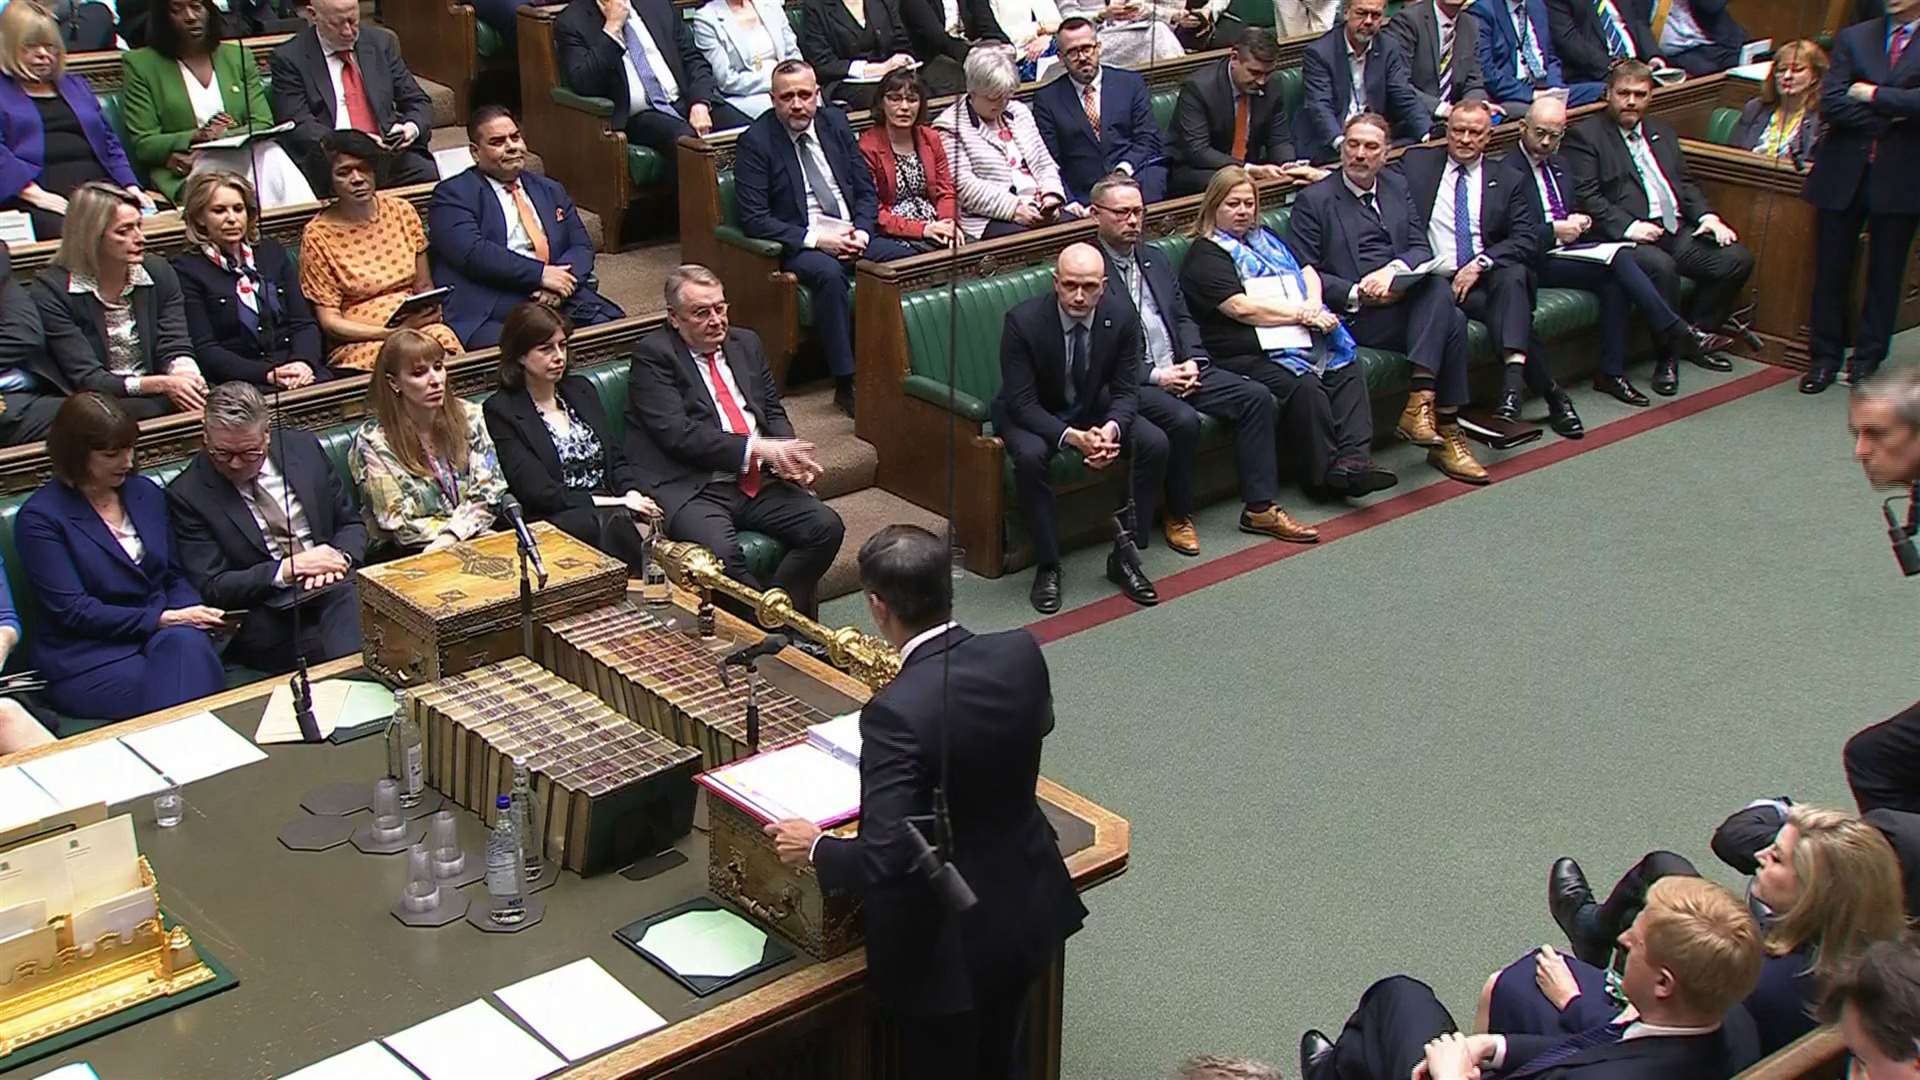 Natalie Elphicke sat behind Sir Keir Starmer during Prime Minister’s Questions (House of Commons/UK Parliament/PA)